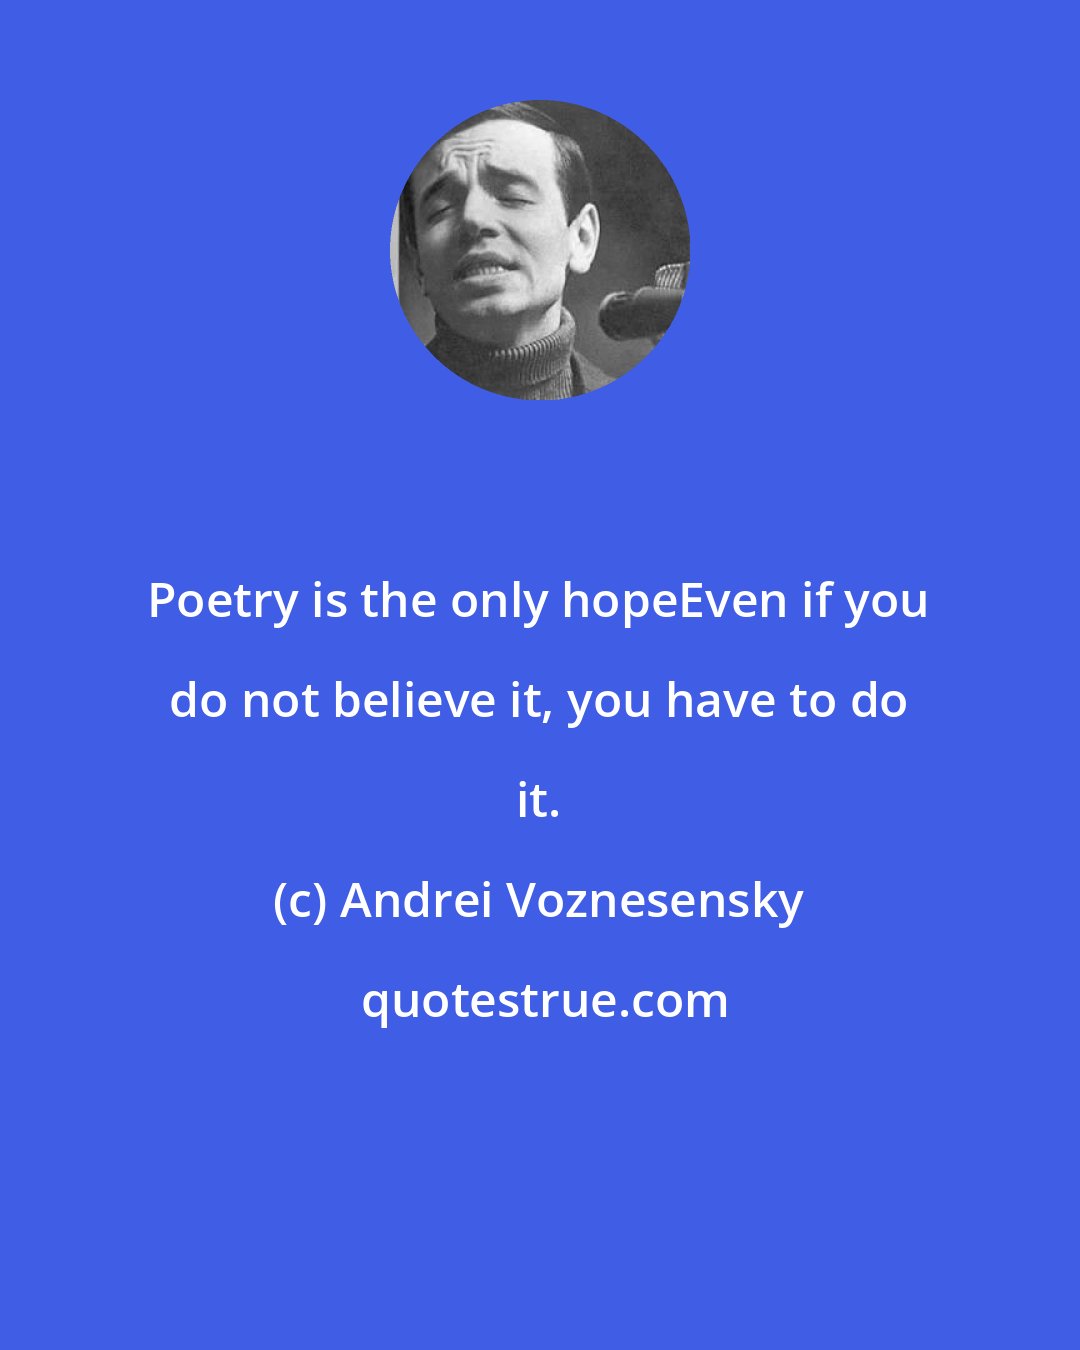 Andrei Voznesensky: Poetry is the only hopeEven if you do not believe it, you have to do it.